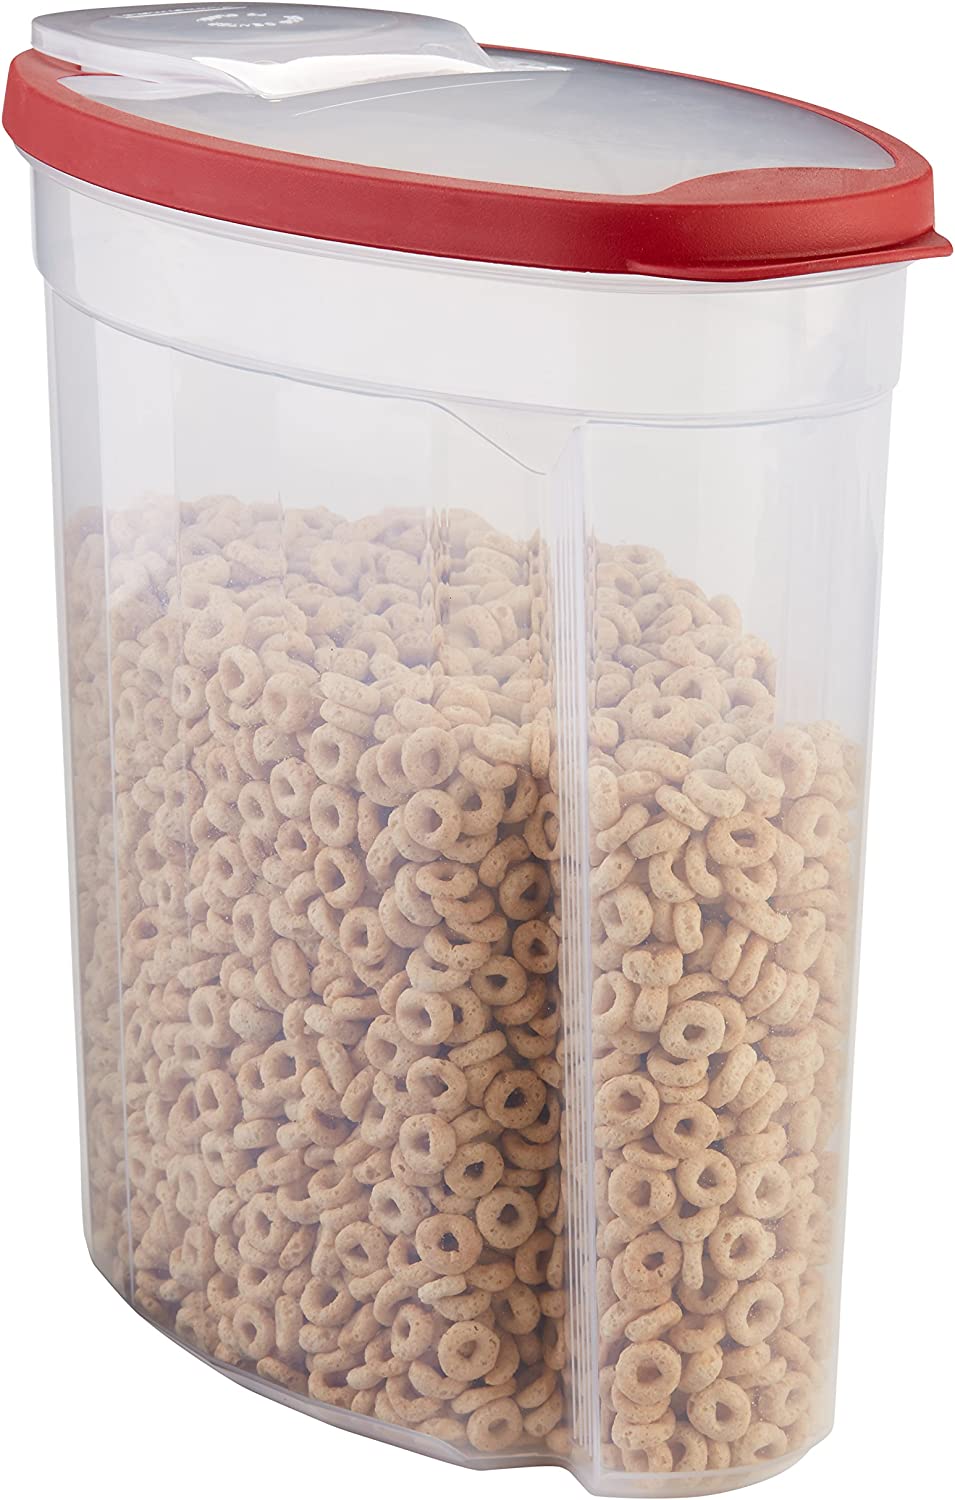 FreshKeeper Cereal Containers Storage Set, Airtight Food Storage Container  with Lid 4L/135.2oz, 2PCS BPA-FREE Plastic Pantry Organization Canisters